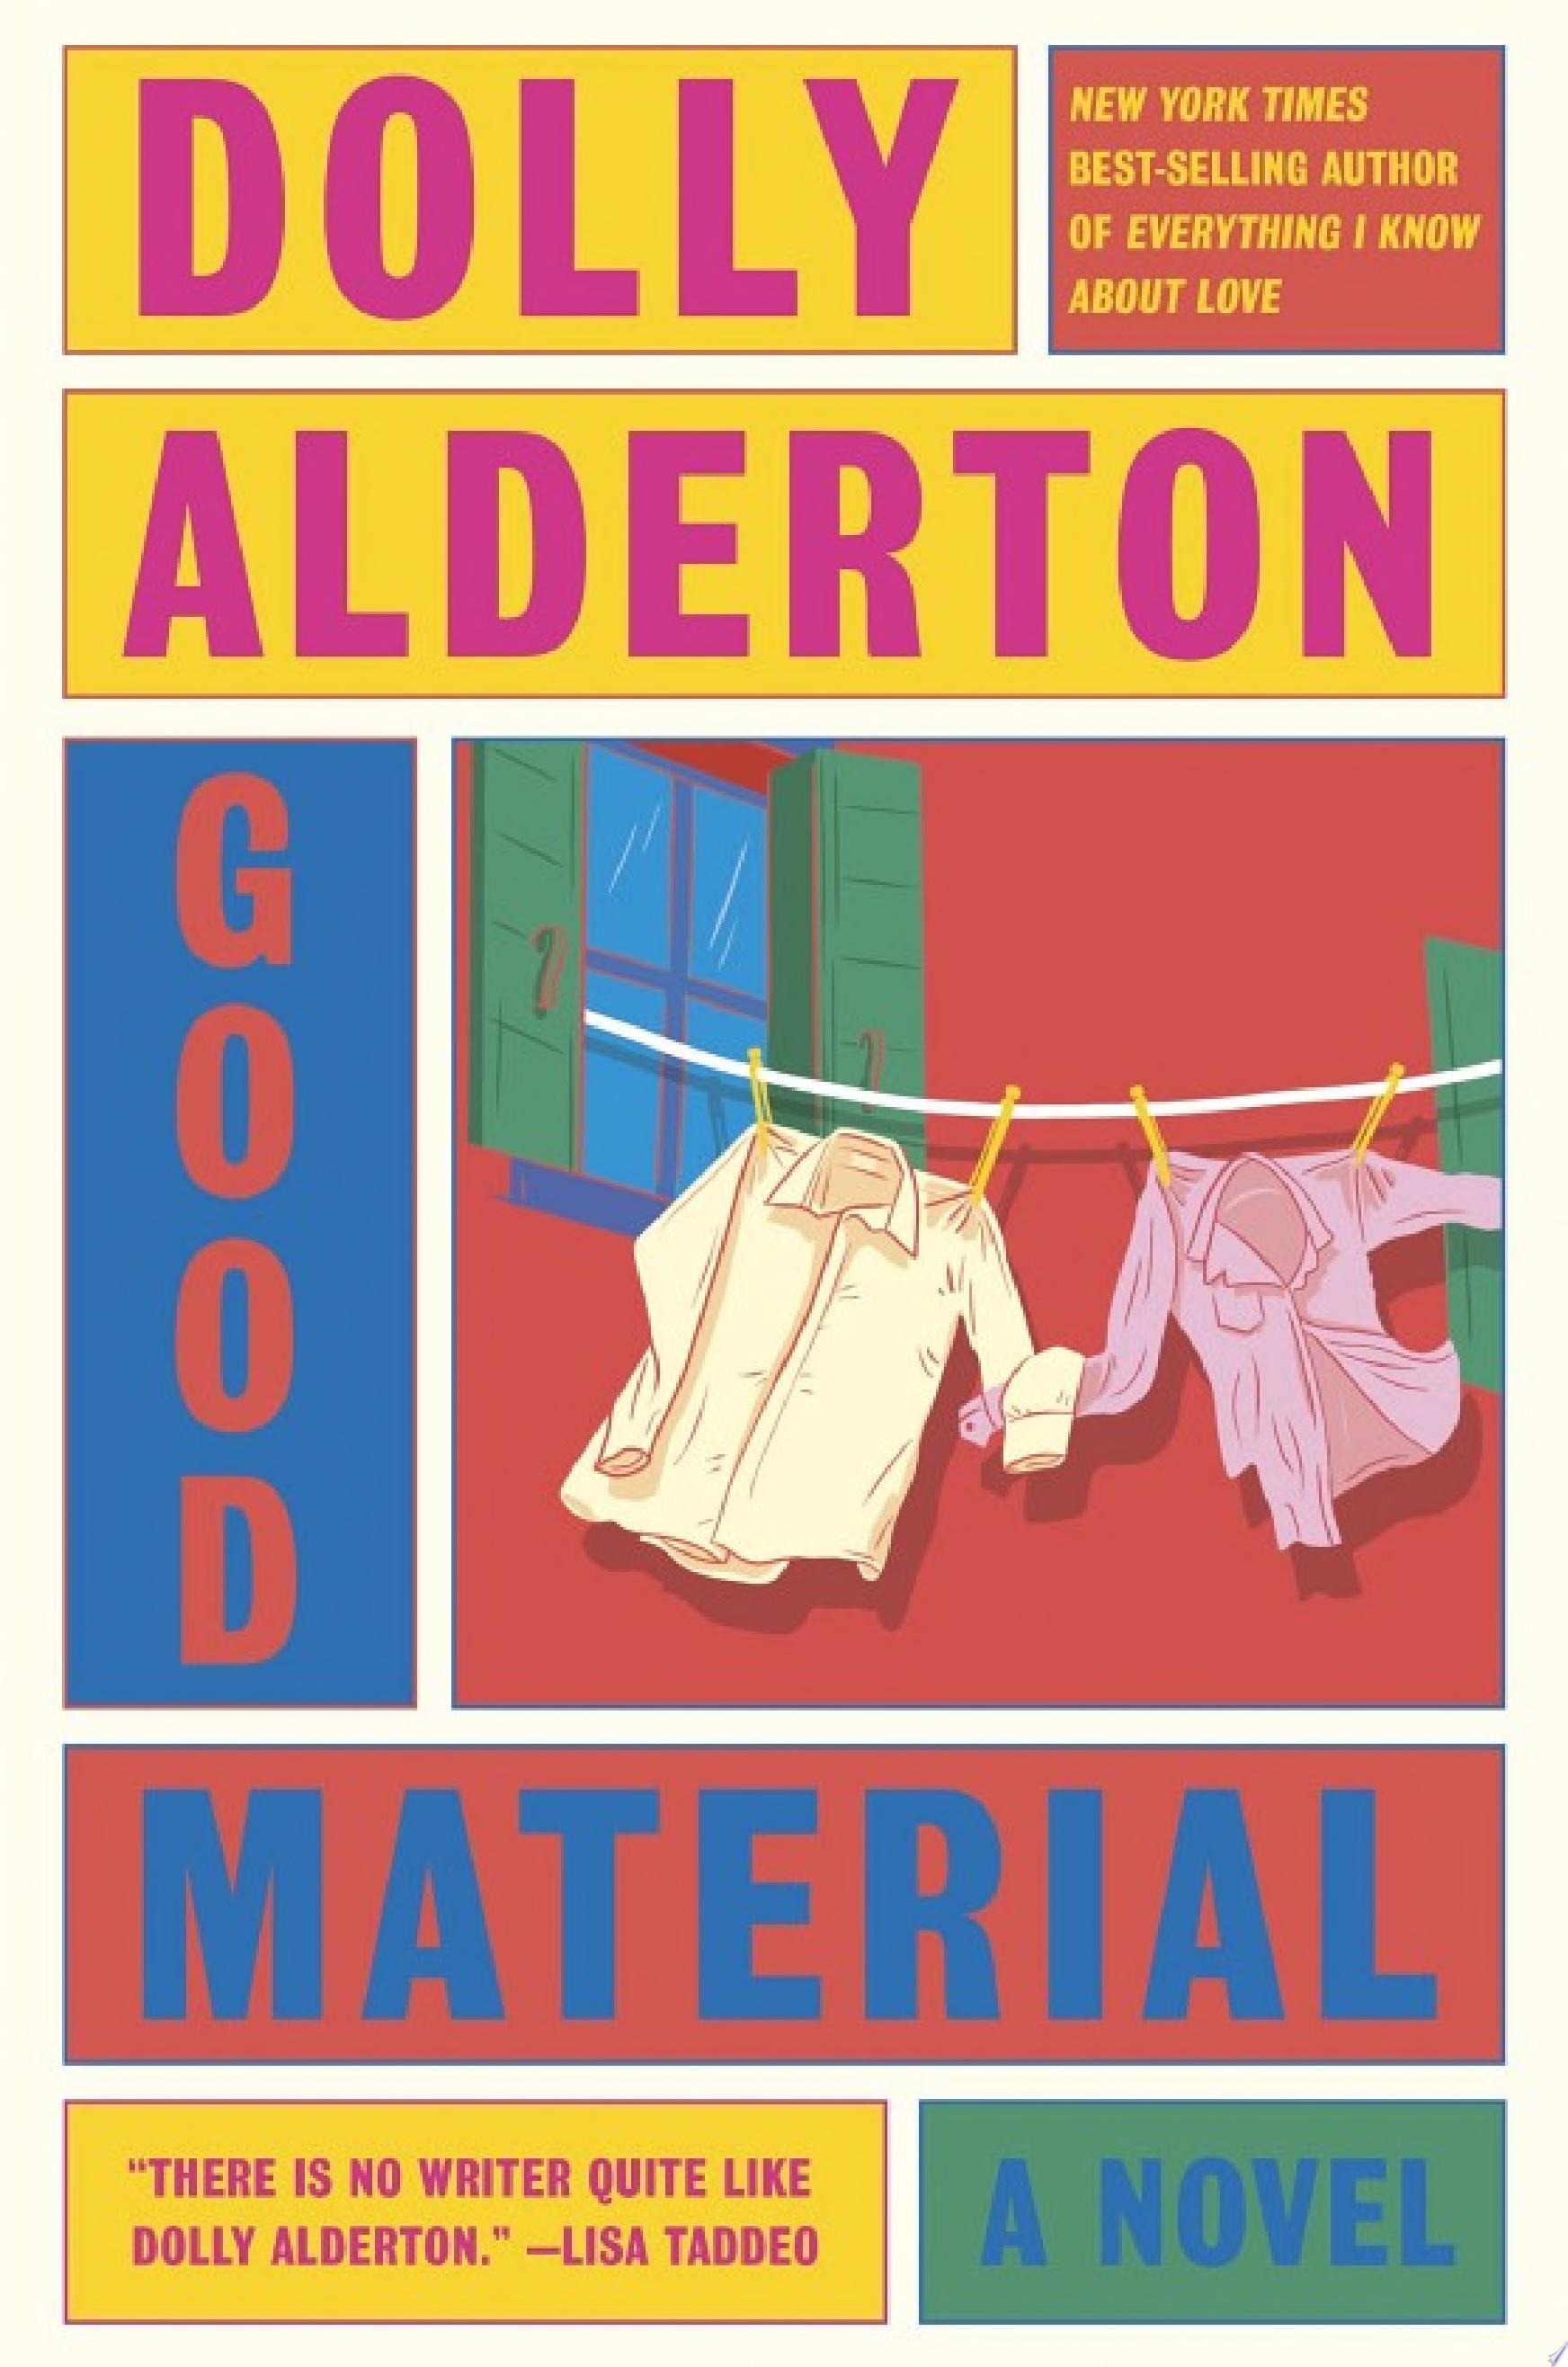 Image for "Good Material"